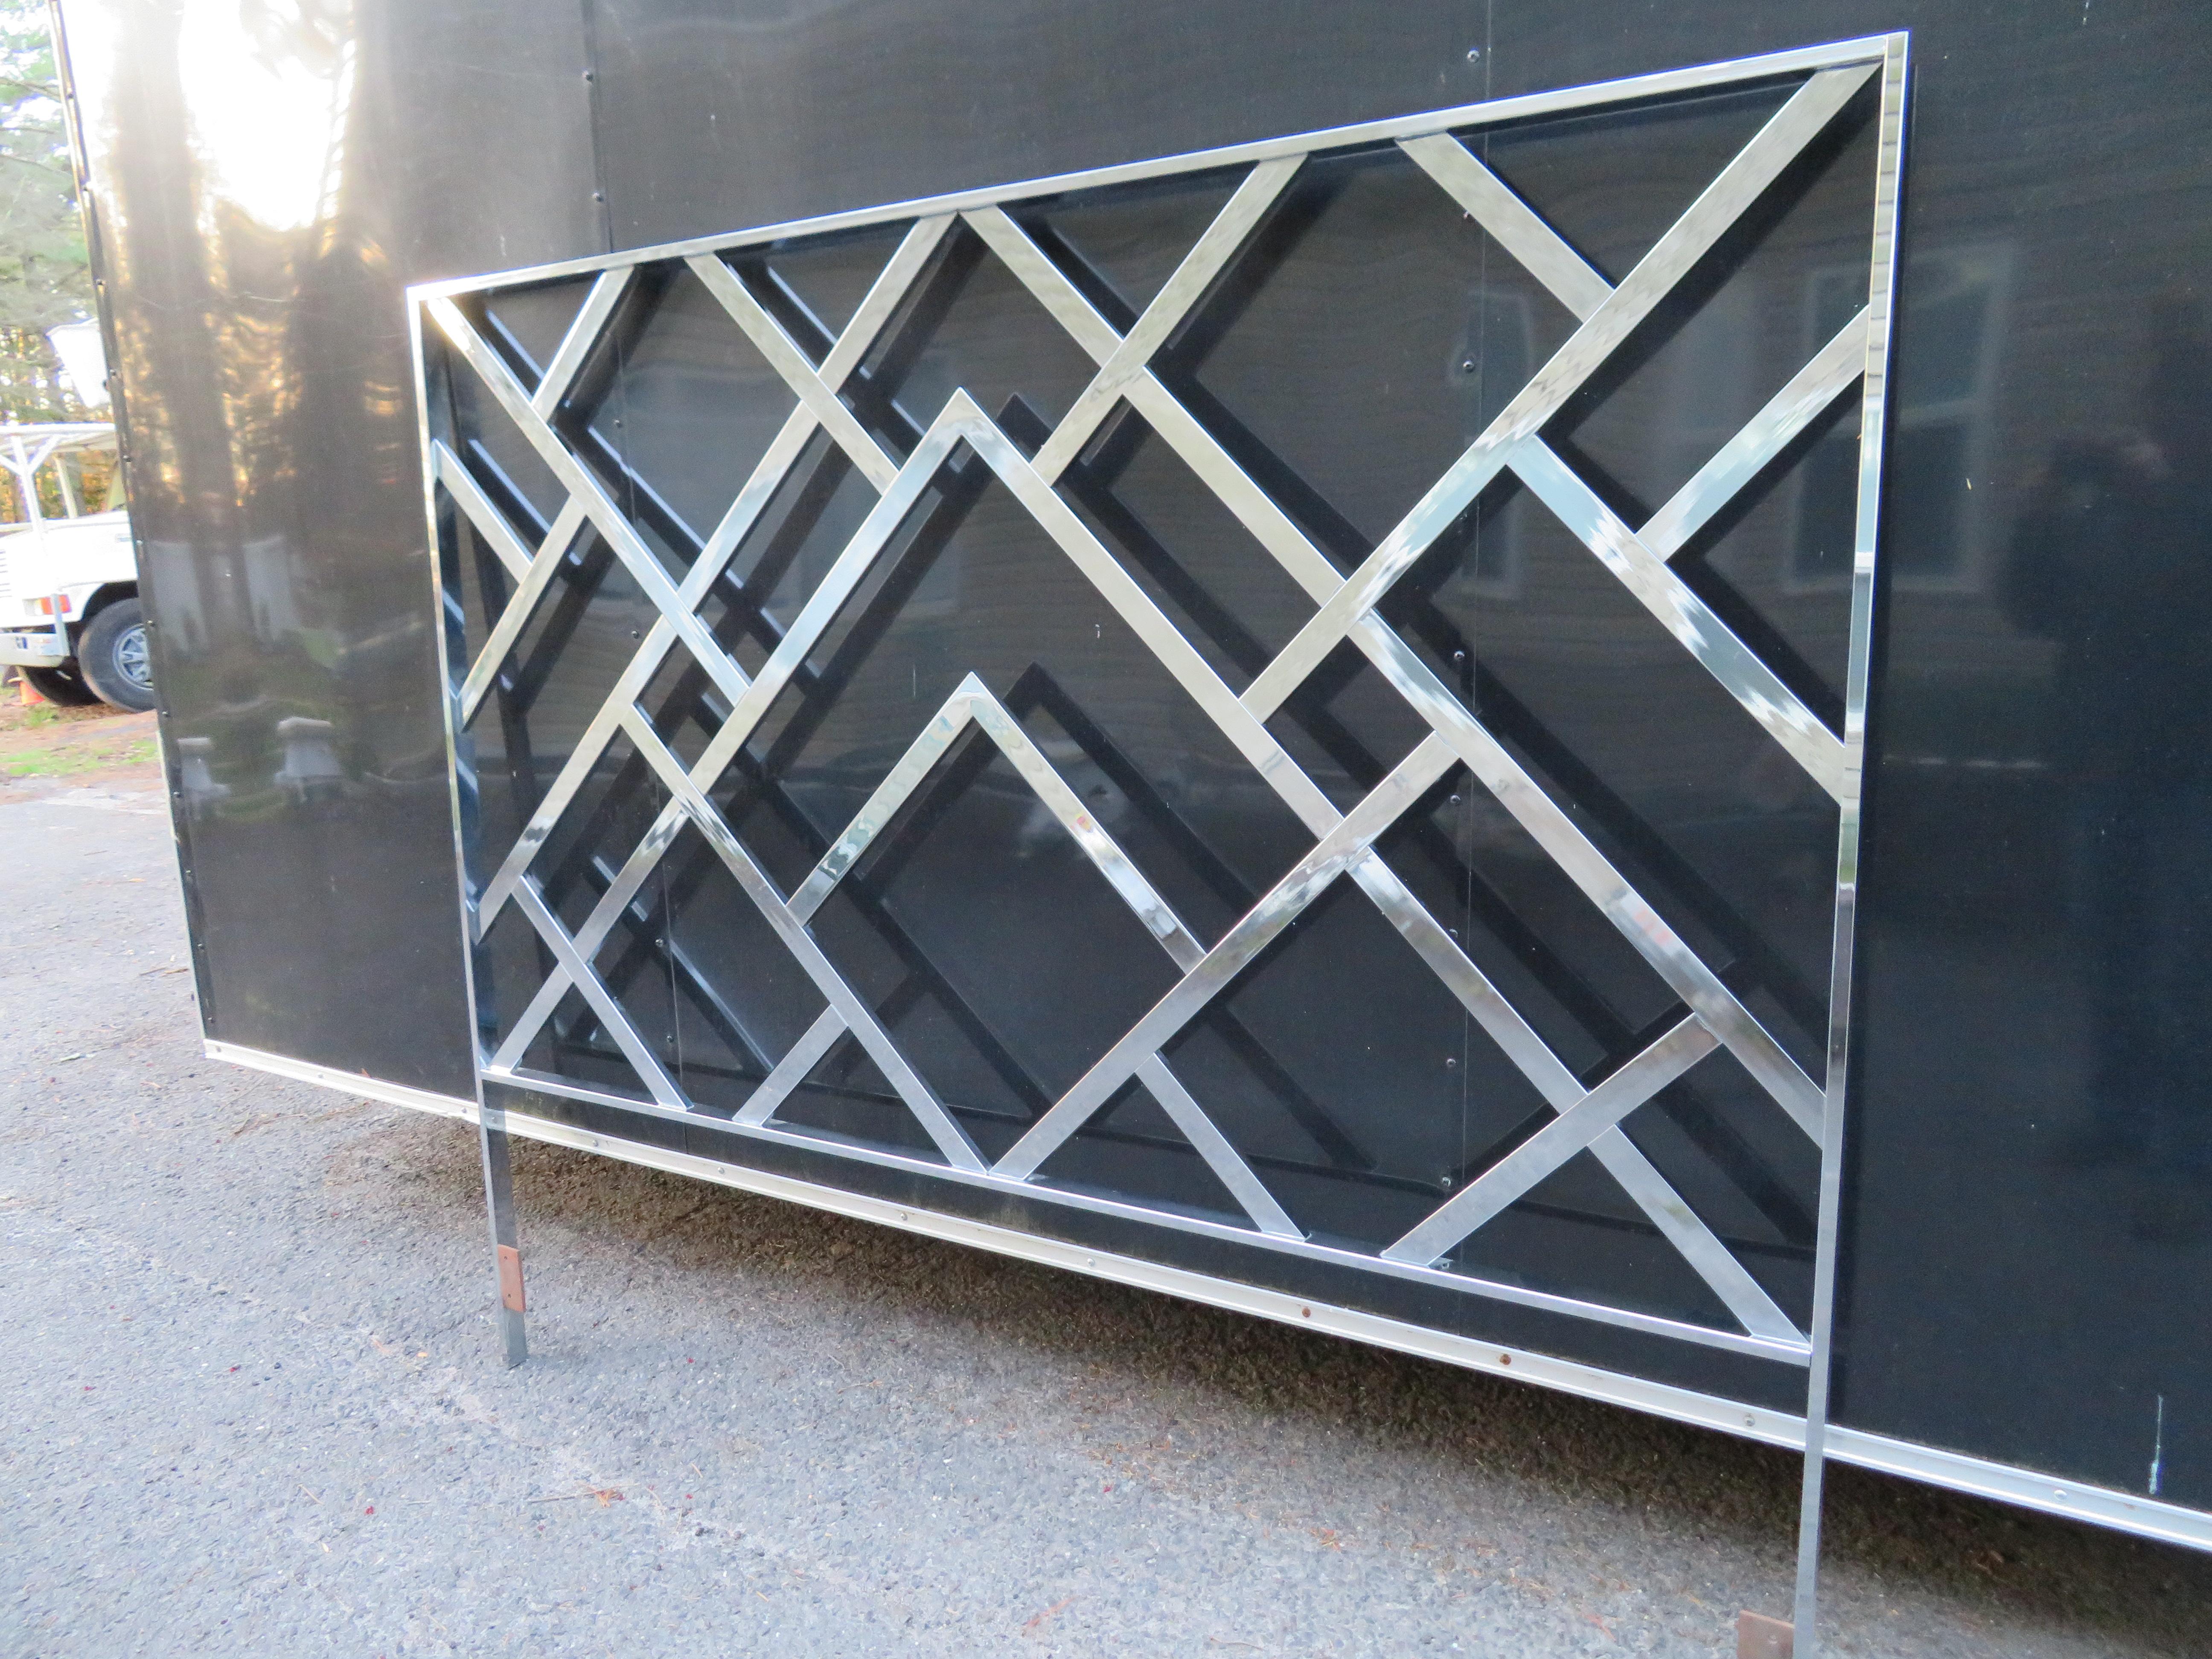 Add some glam to your bedroom with this amazing midcentury or chinoiserie style chrome king size headboard. This piece, which some attribute to Milo Baughman DIA features a mirror finish chrome frame with a classic fretwork or lattice design. It is